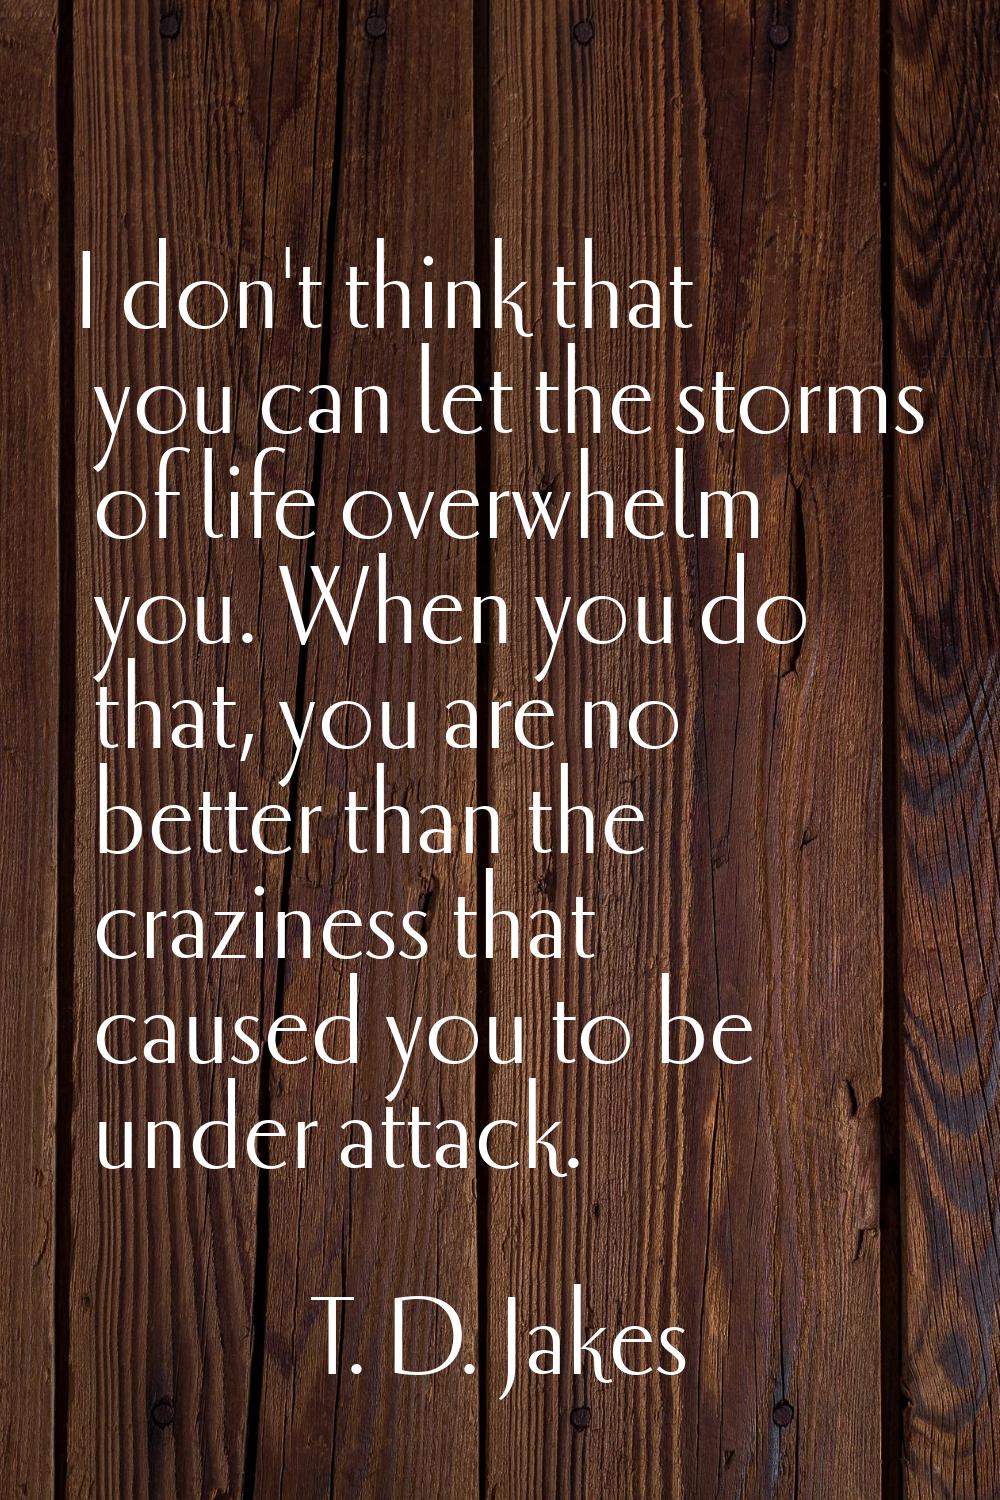 I don't think that you can let the storms of life overwhelm you. When you do that, you are no bette